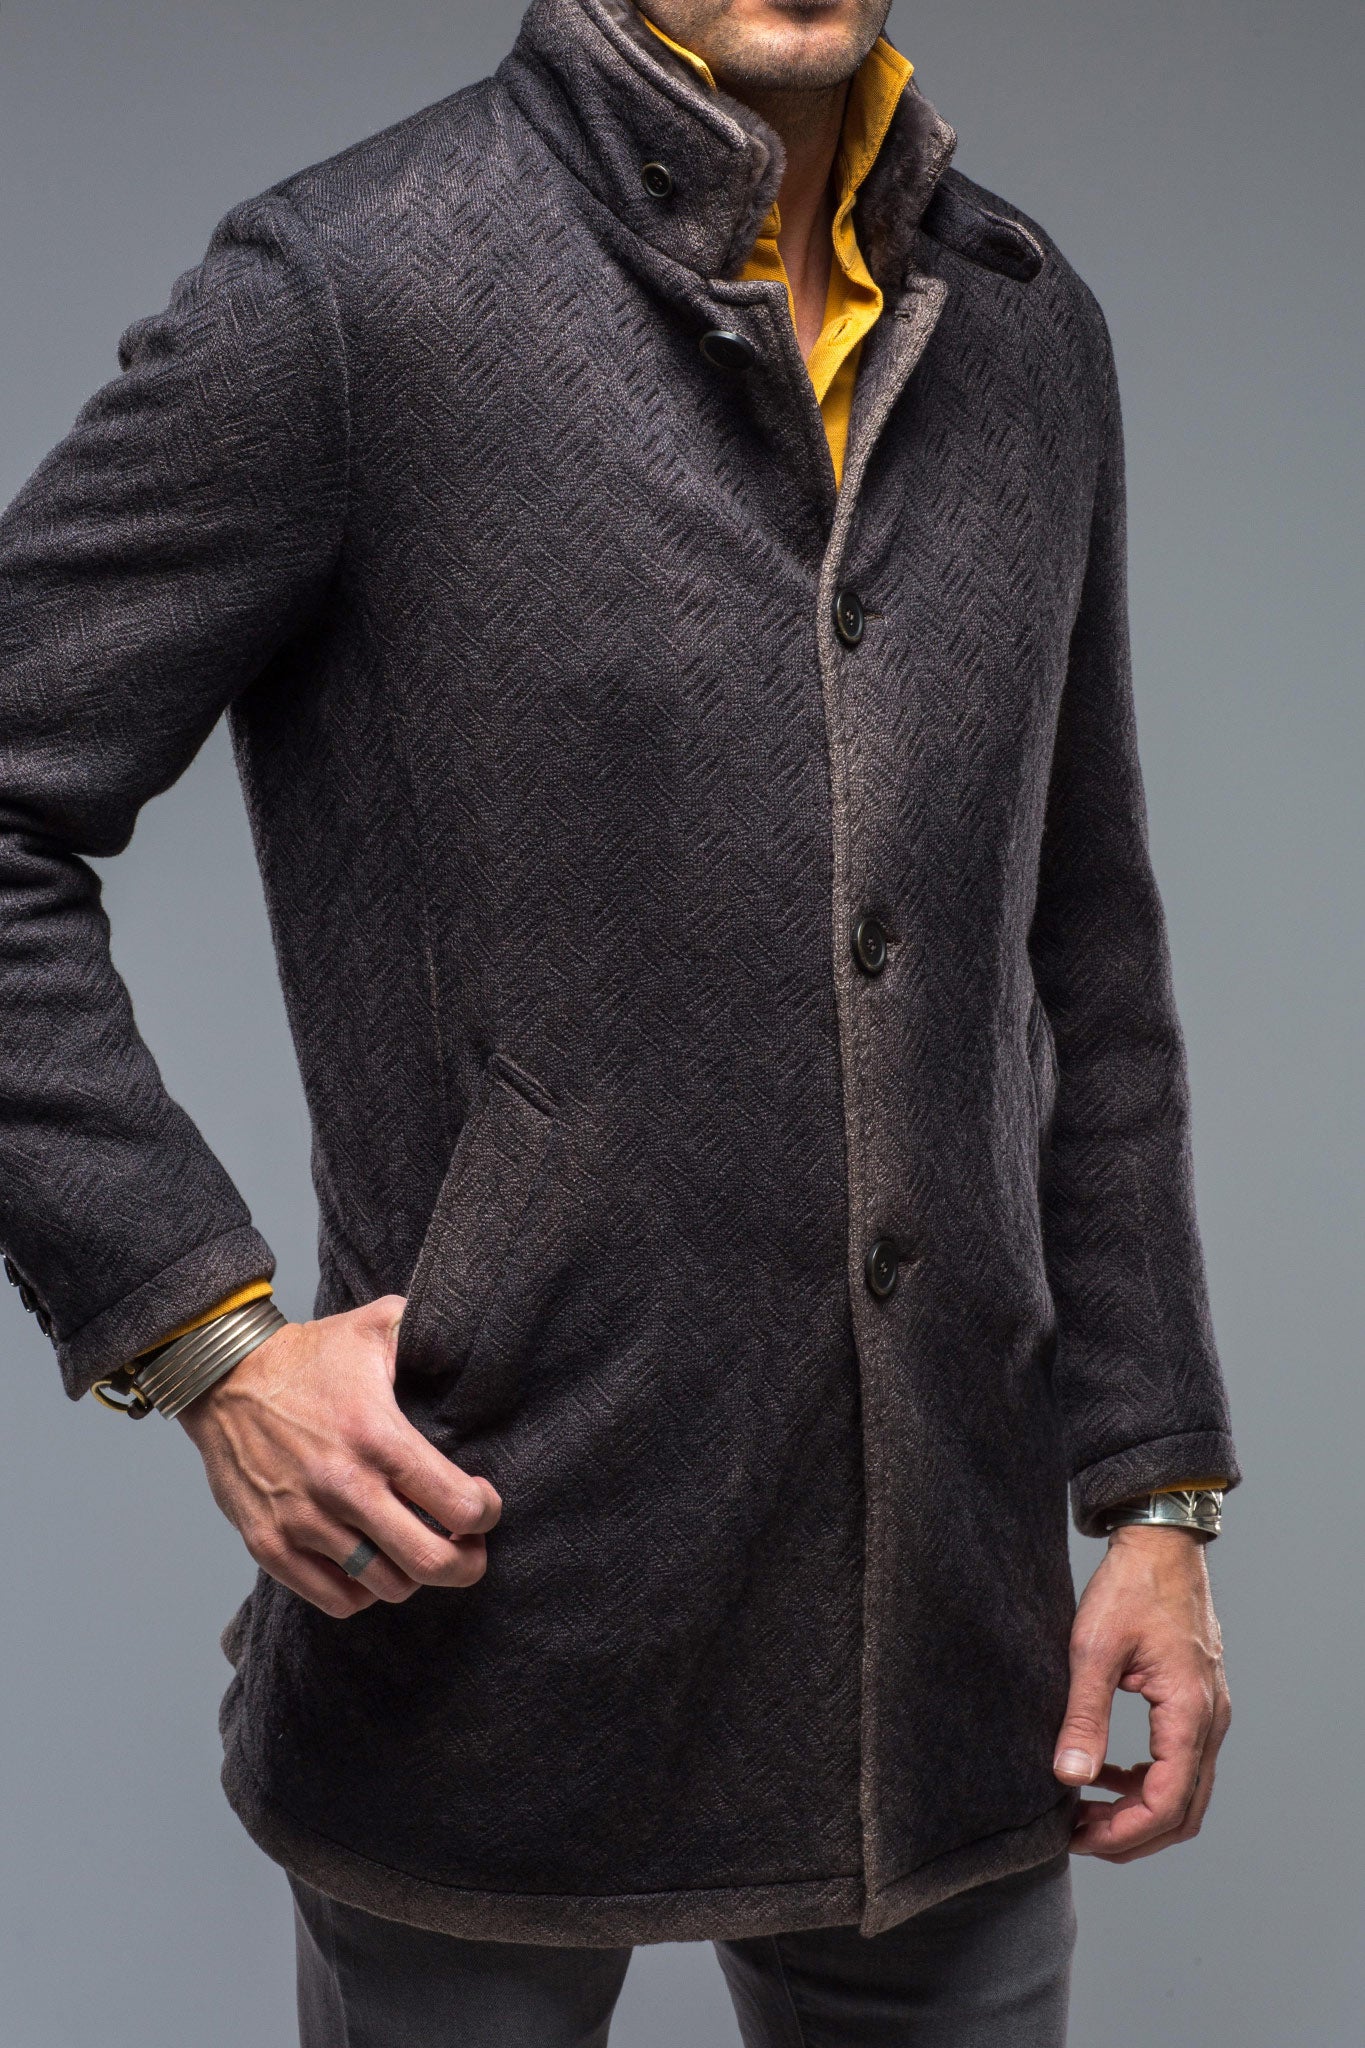 St. Marks Jacket | Warehouse - Mens - Outerwear - Overcoats | Gimo's